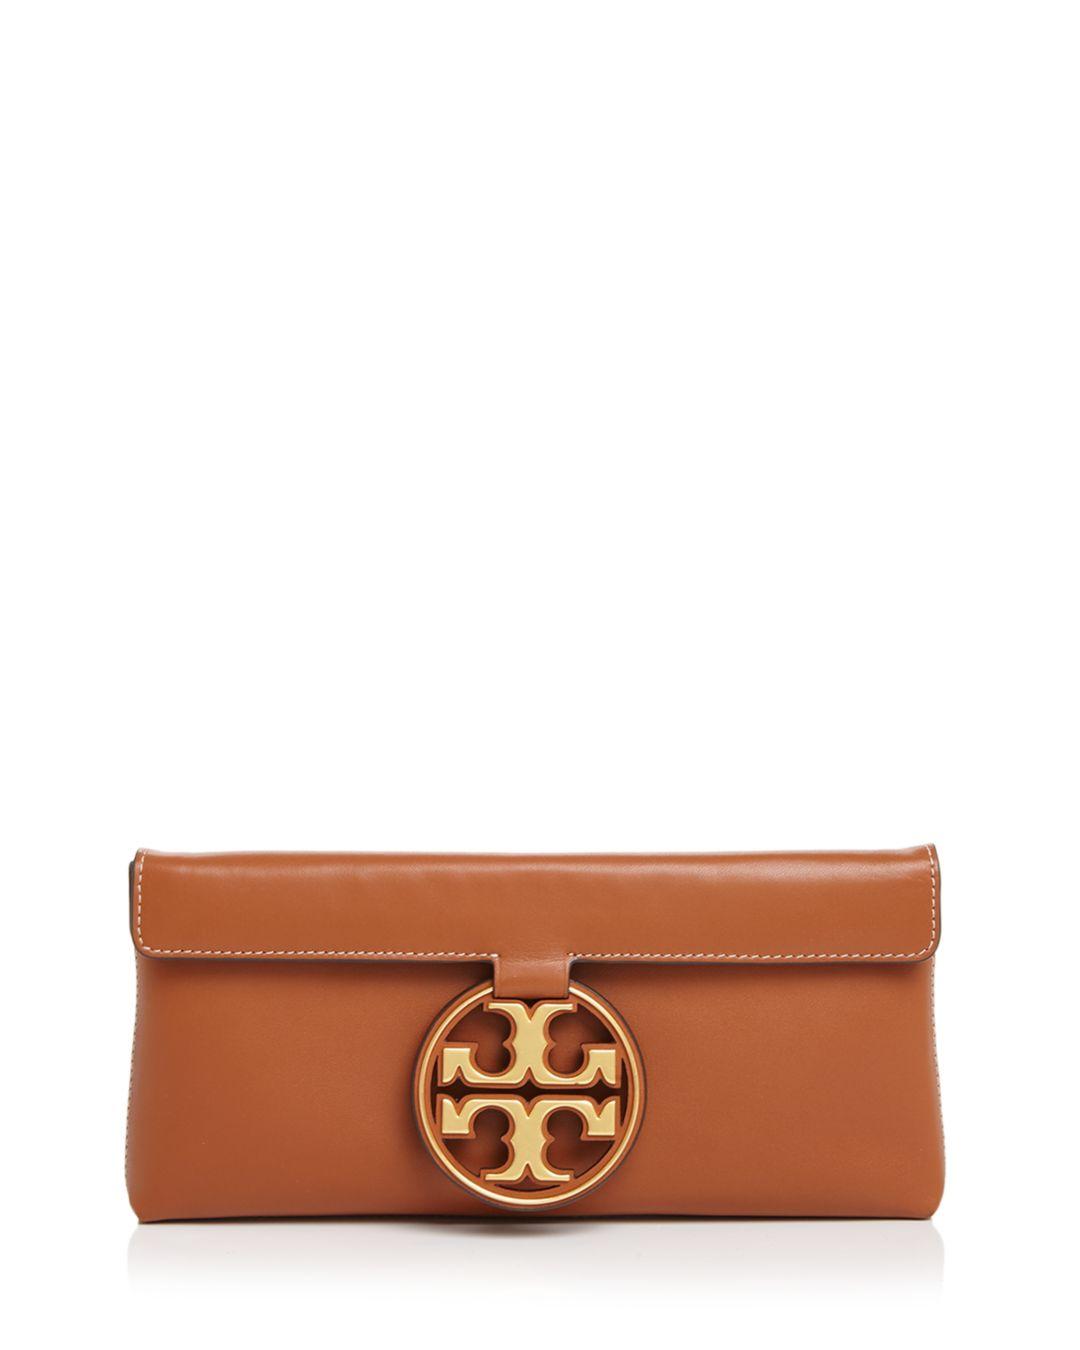 Tory Burch Miller Small Leather Clutch in Black/Gold (Black) - Save 30% ...